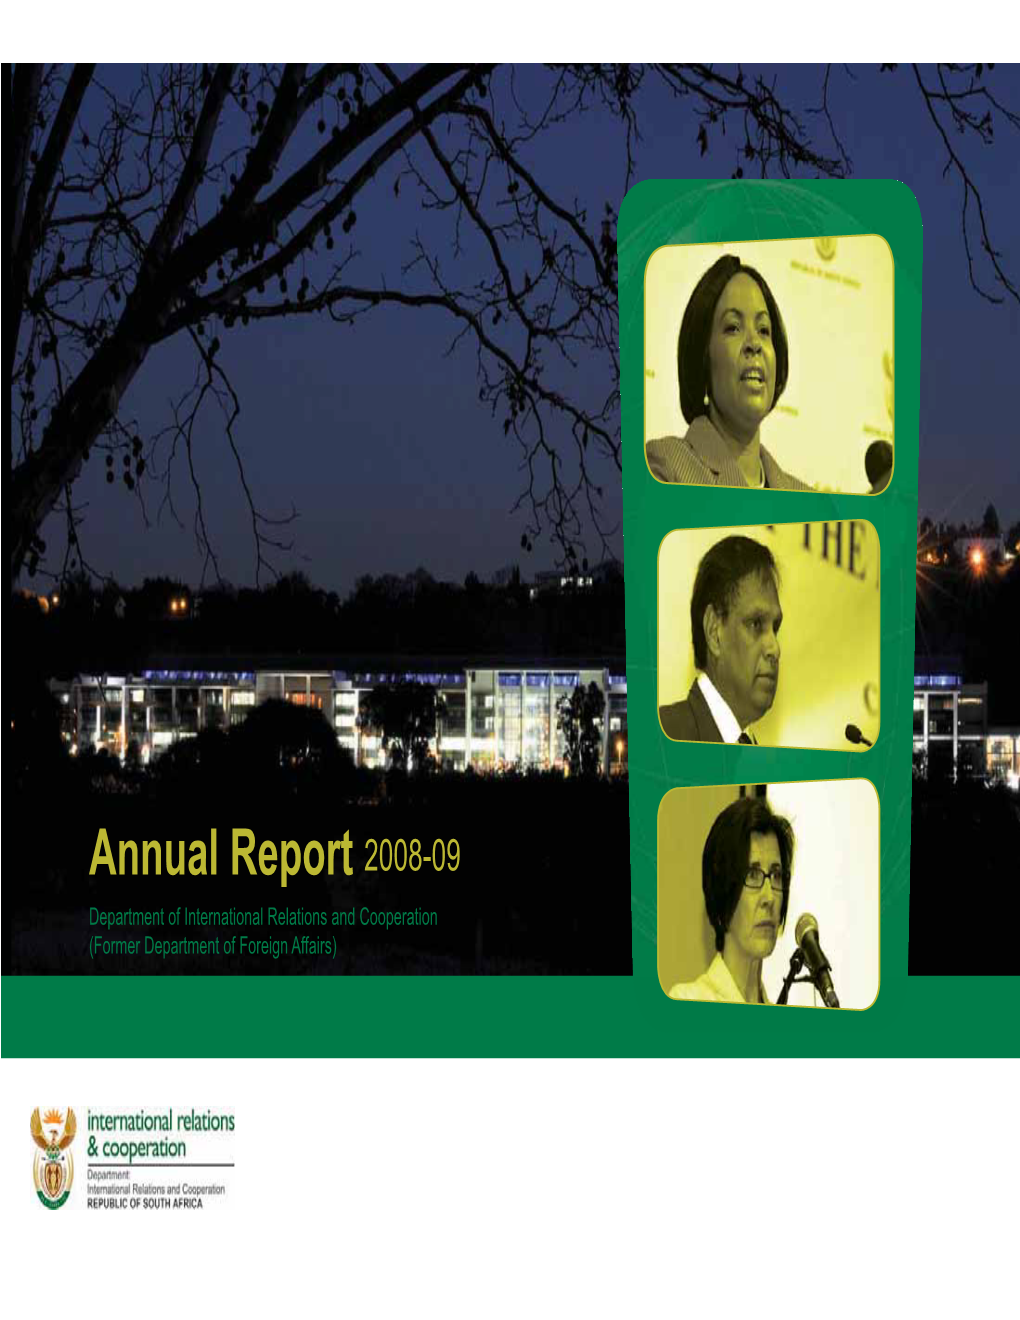 Department of International Relations and Cooperation Annual Report 2008/2009